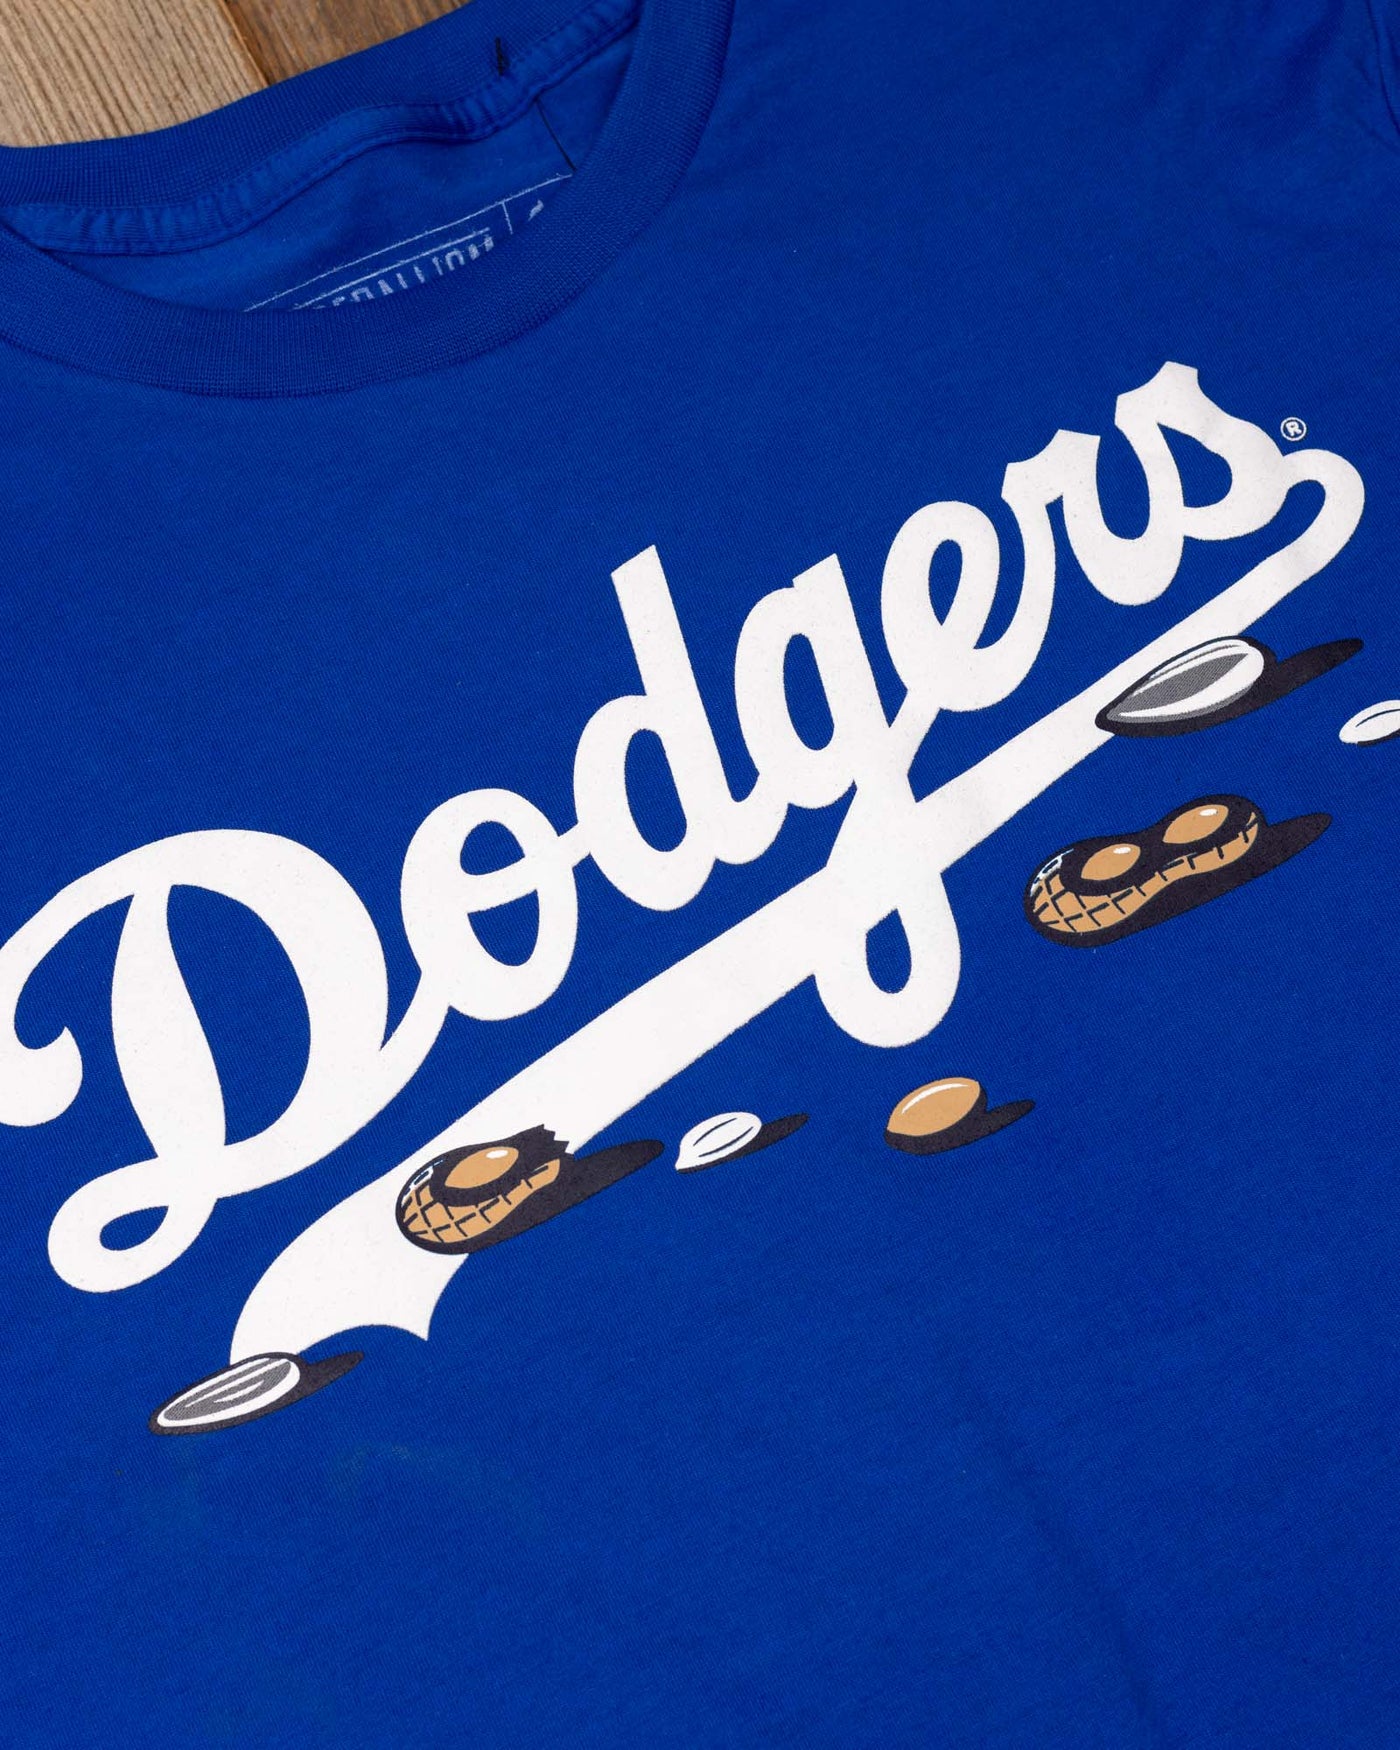 Get Your Peanuts! - Los Angeles Dodgers